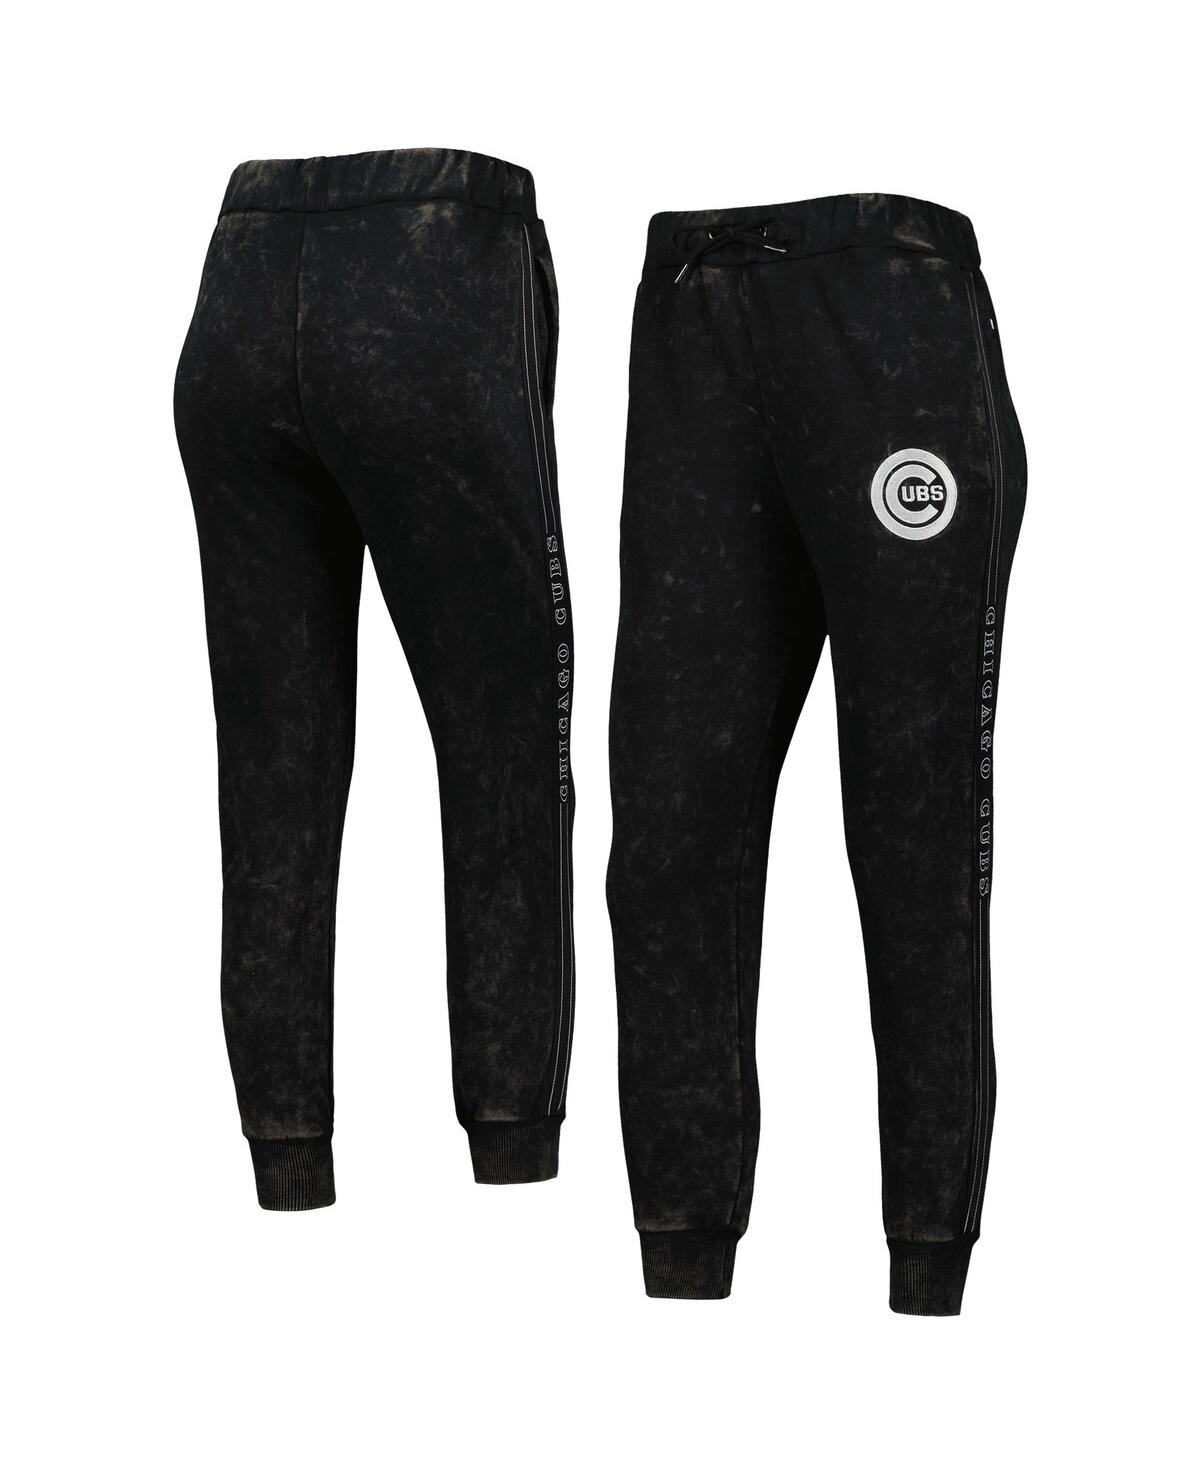 Shop The Wild Collective Women's  Black Chicago Cubs Marble Jogger Pants